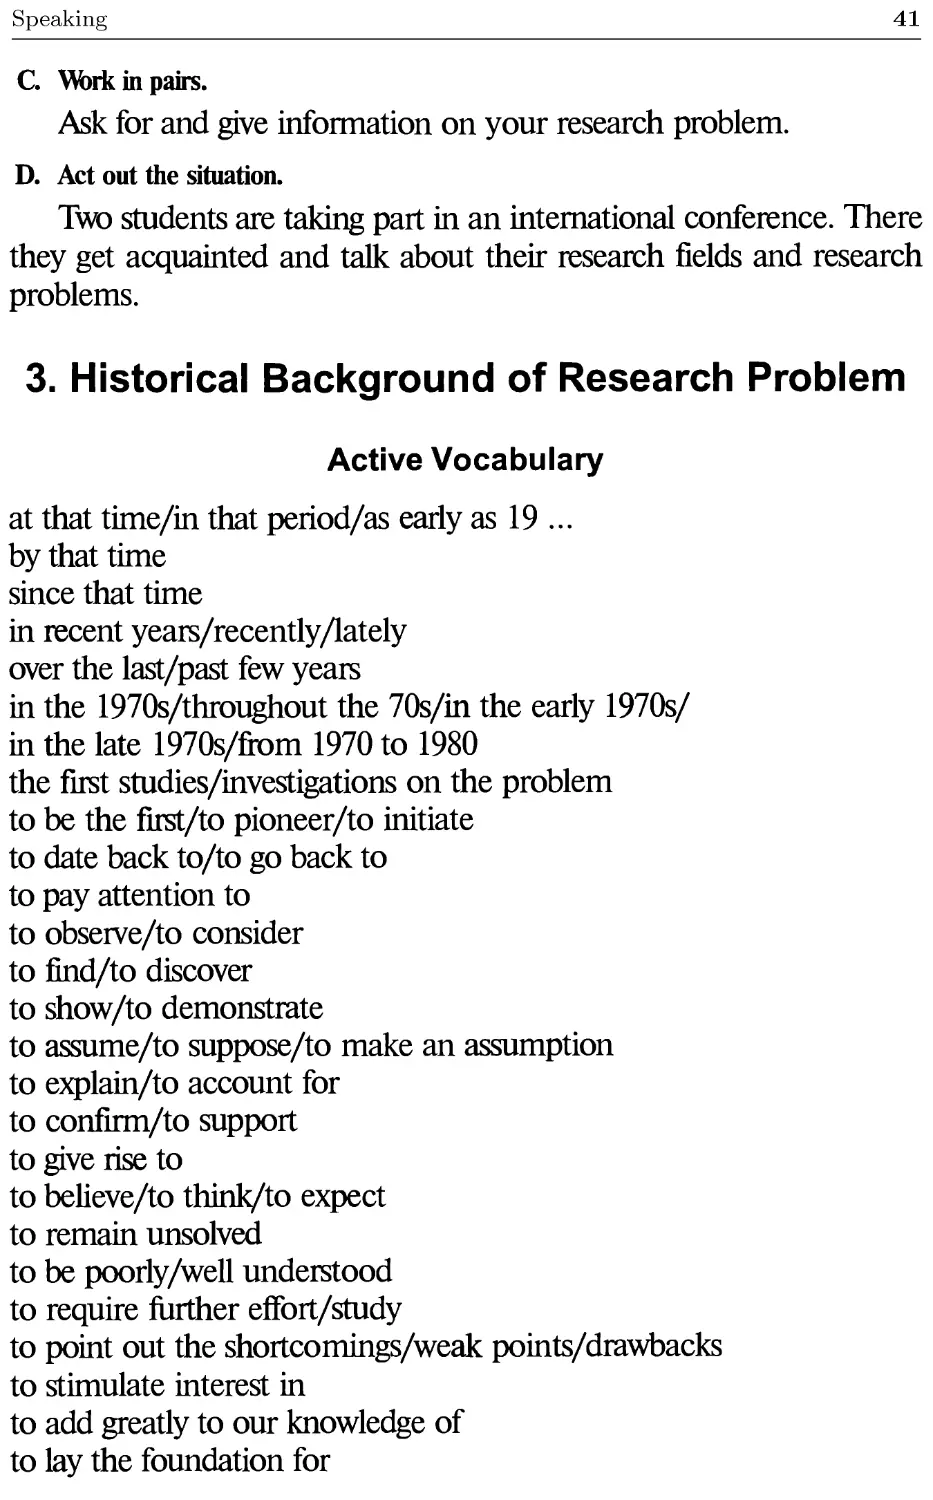 3. Historical Background of Research Problem